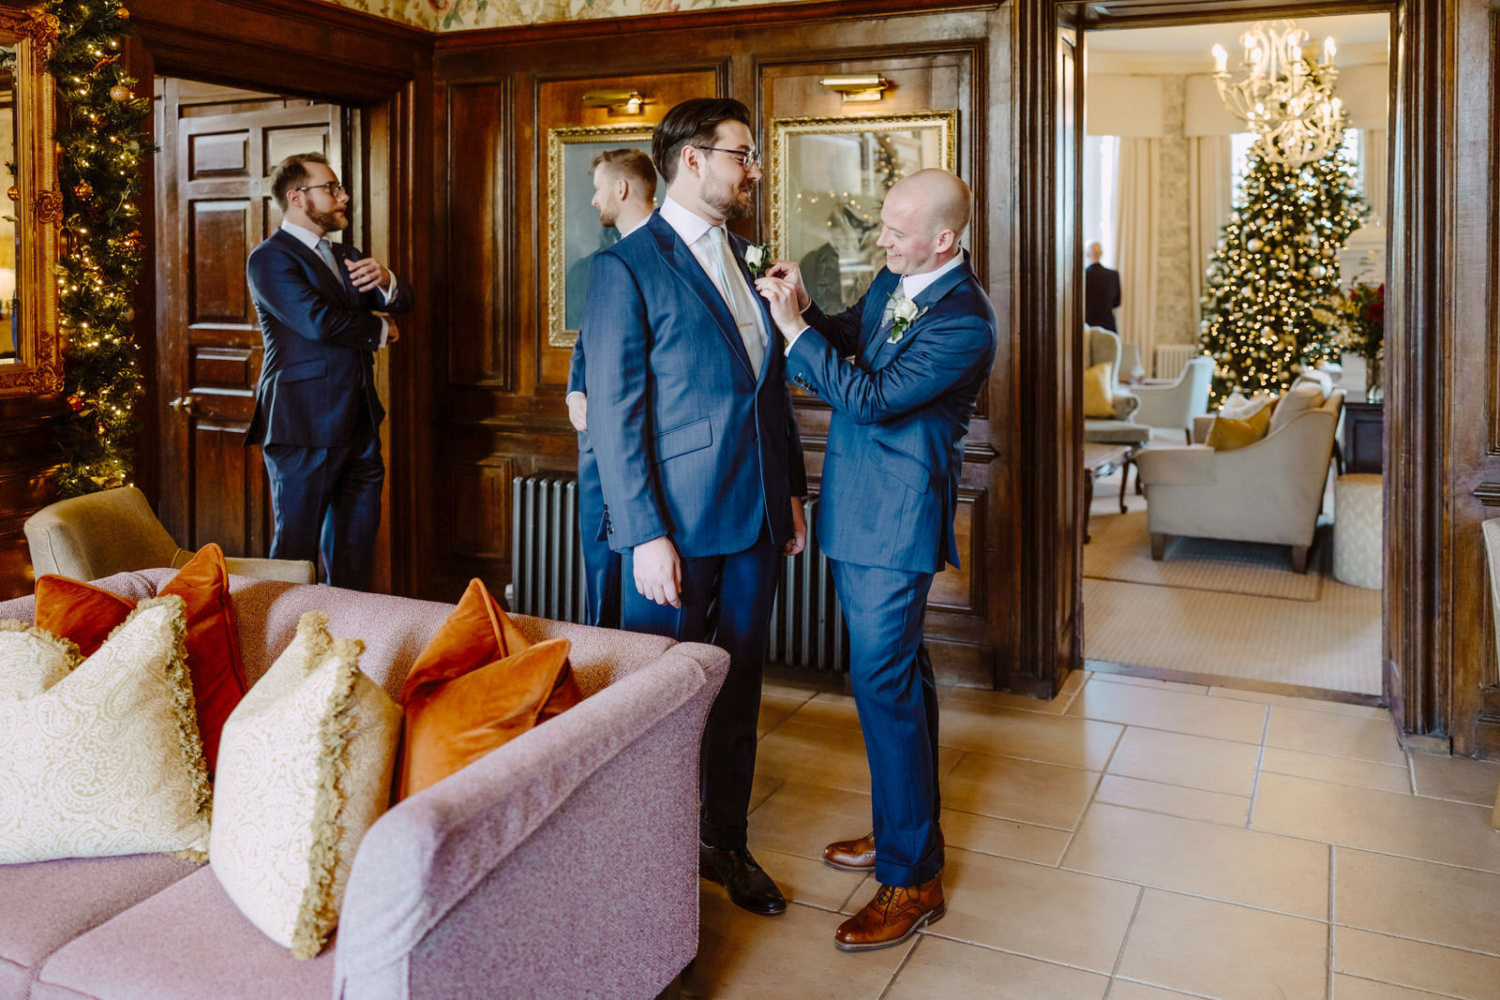 The groom place a buttonhole for his best man in a suit is getting ready in a room with a christmas tree at Rowton castle hallway.